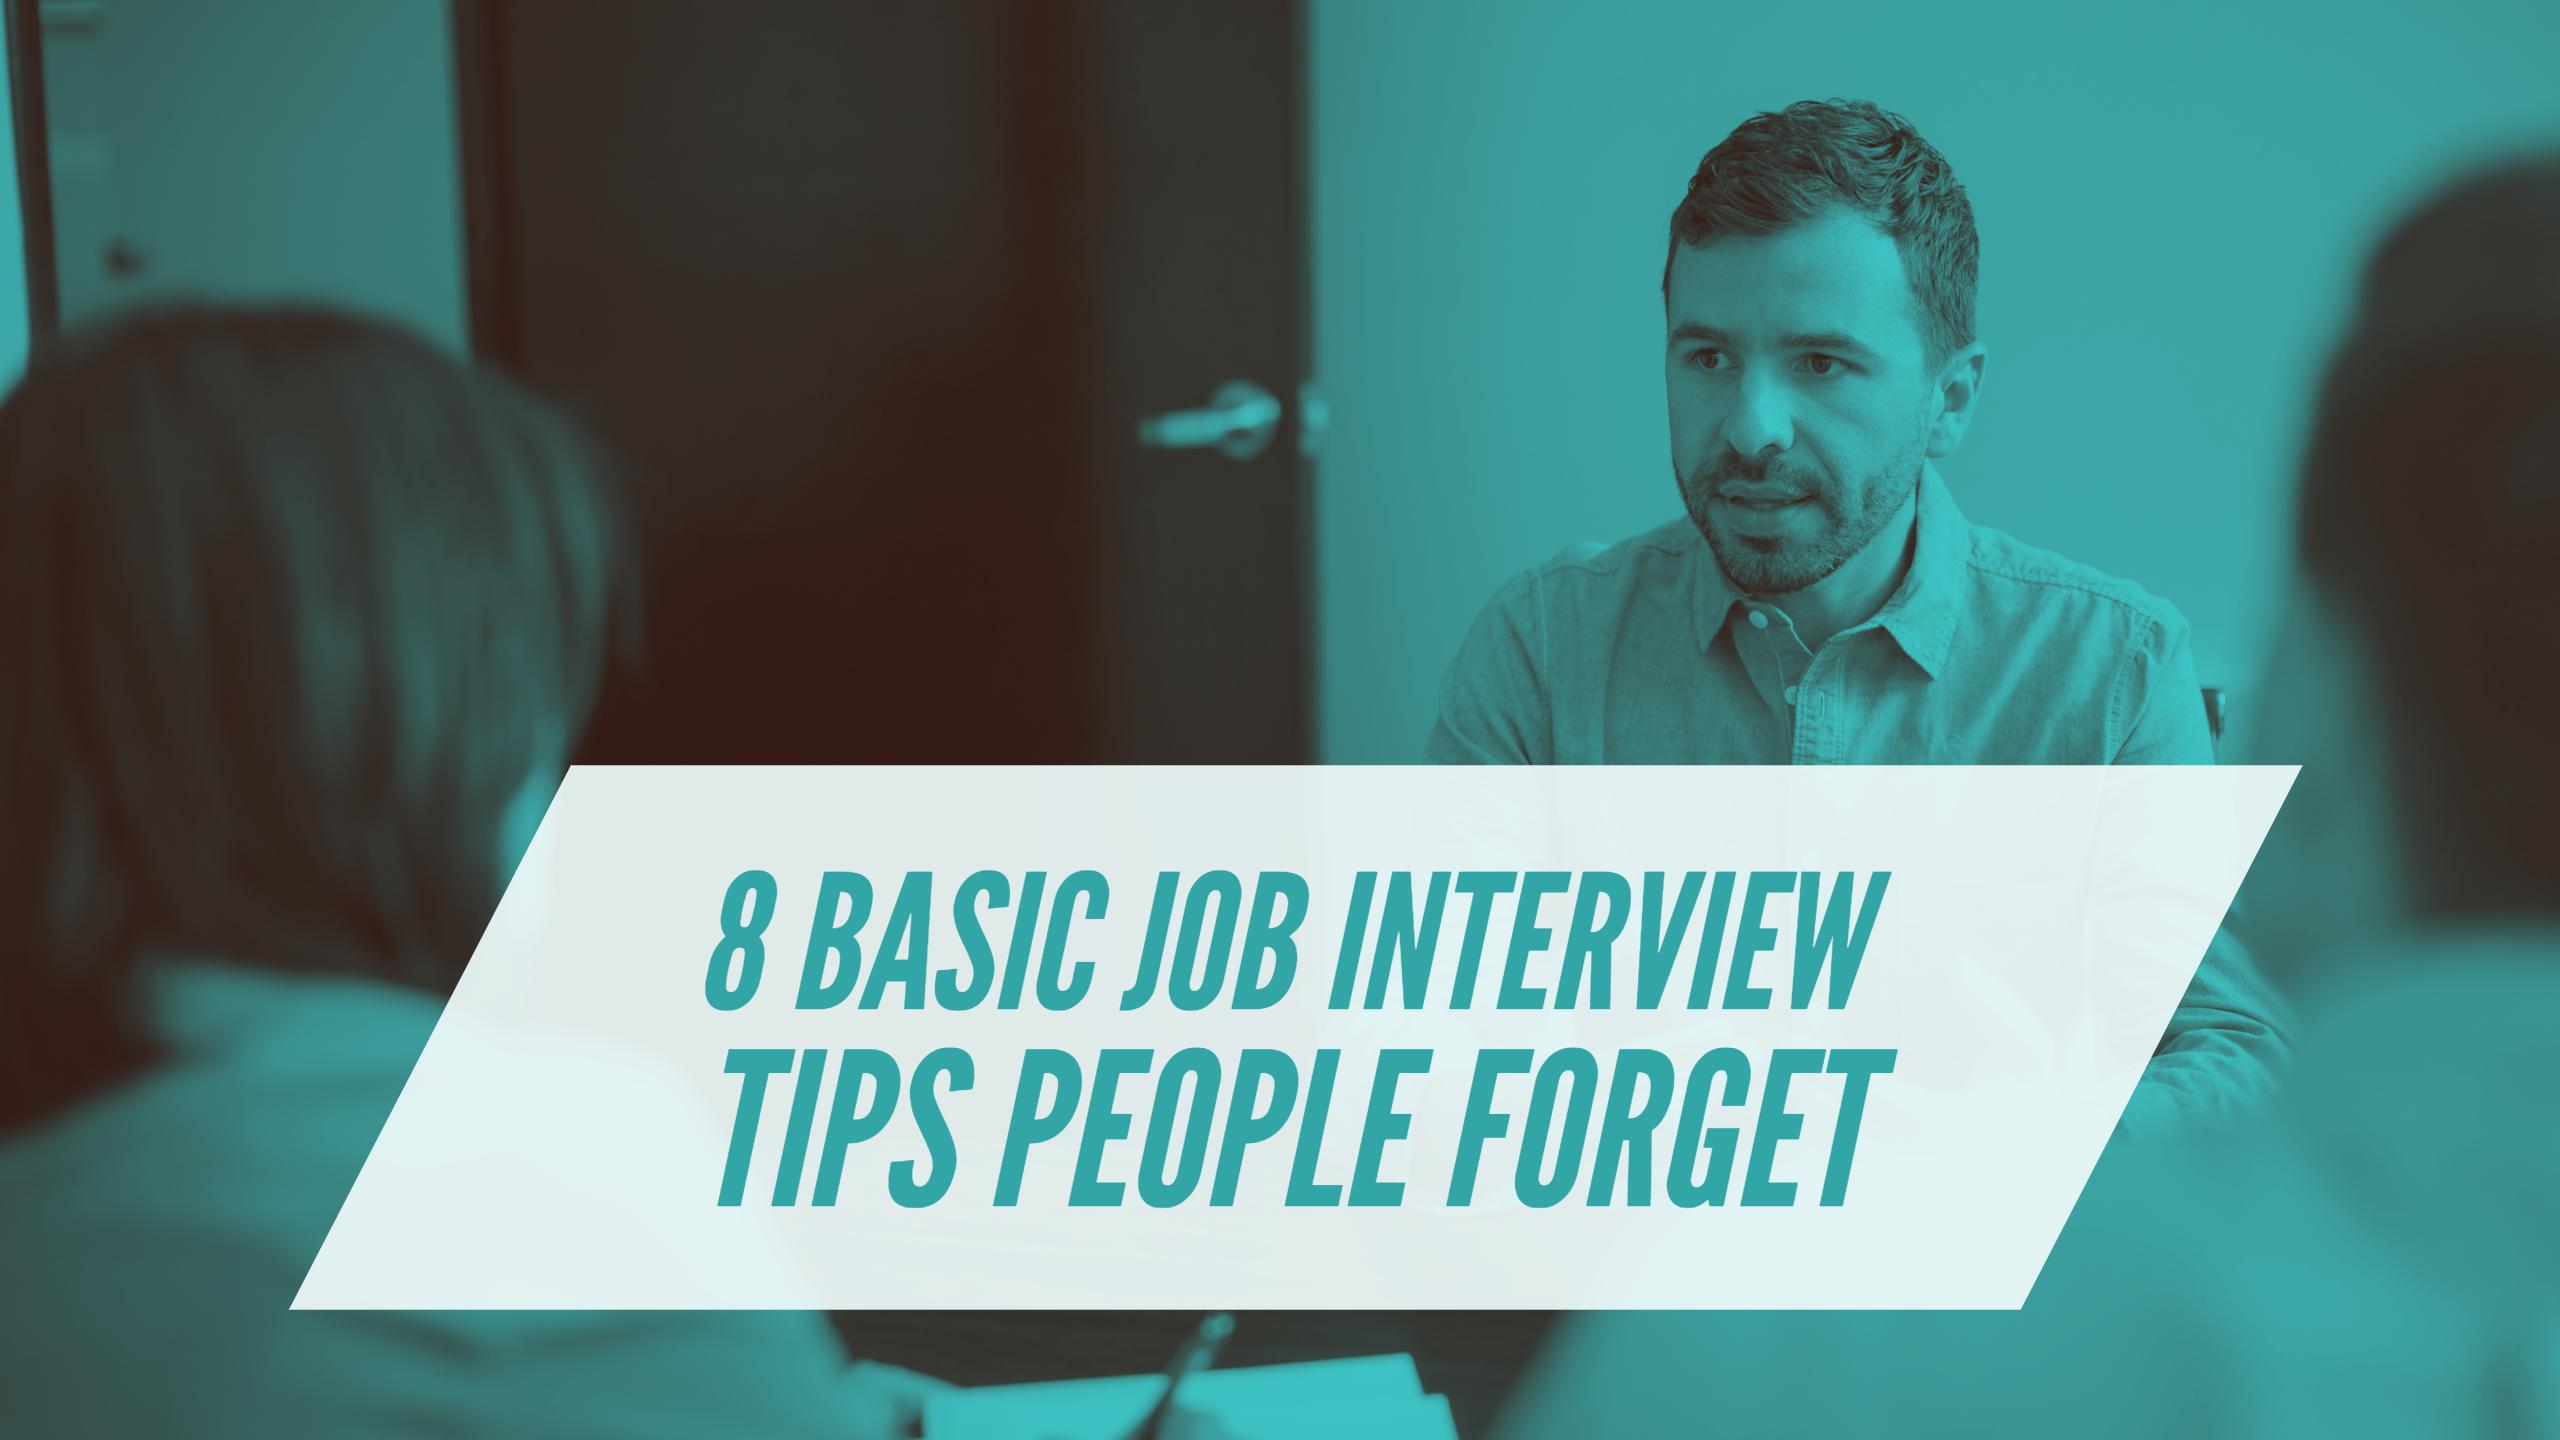 8 Basic Job Interview Tips People Forget